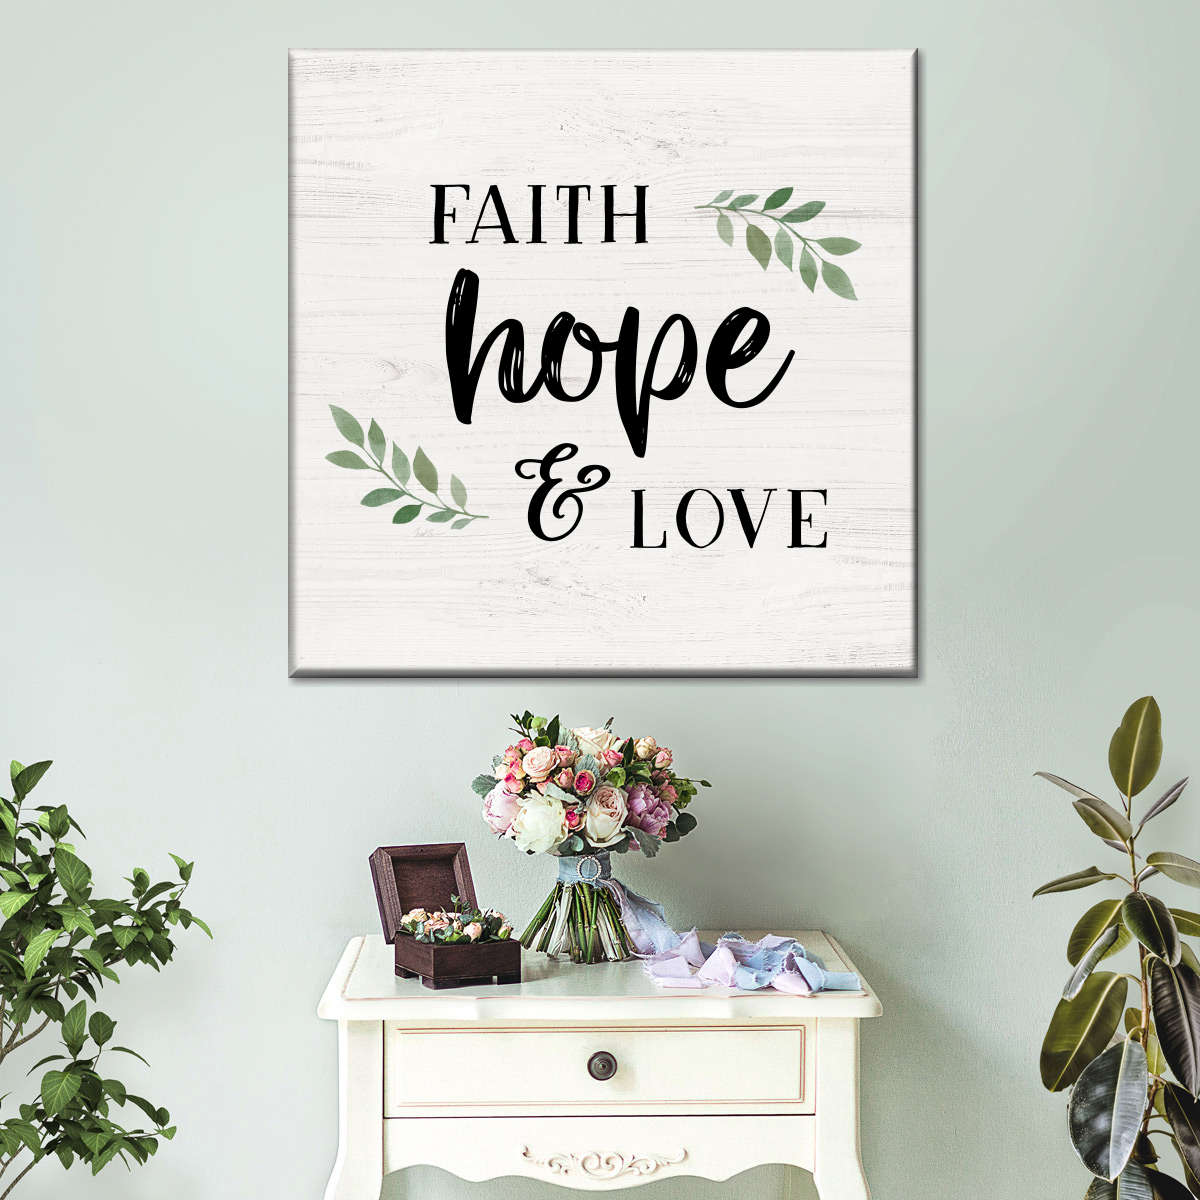 Hope And Love Square Canvas Wall Art - Christian Wall Decor - Christian Wall Hanging